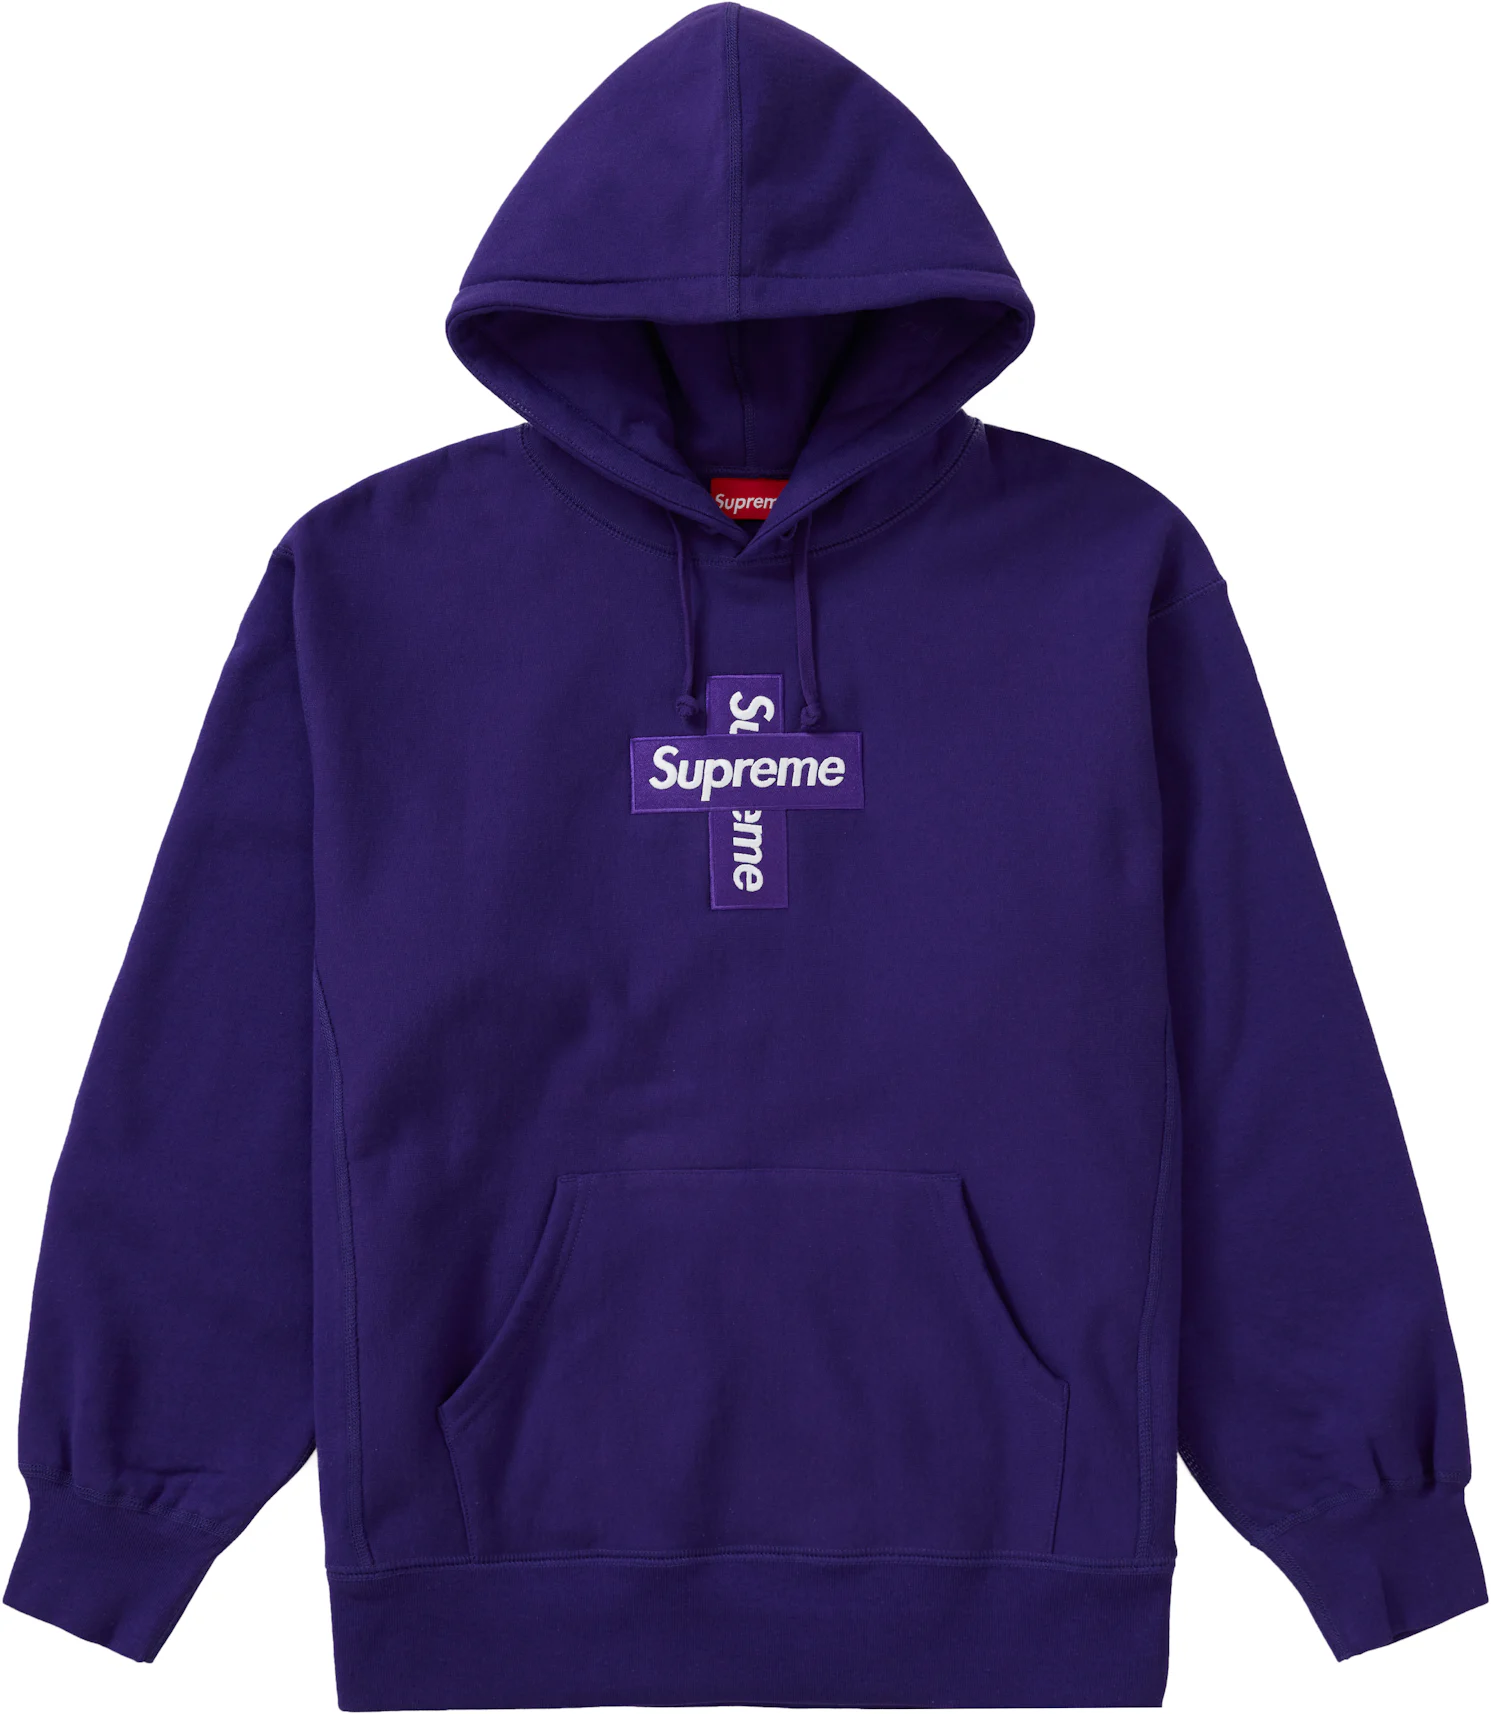 Supreme GOLD LOGO Long Sleeve PURPLE Size Medium - clothing & accessories -  by owner - apparel sale - craigslist